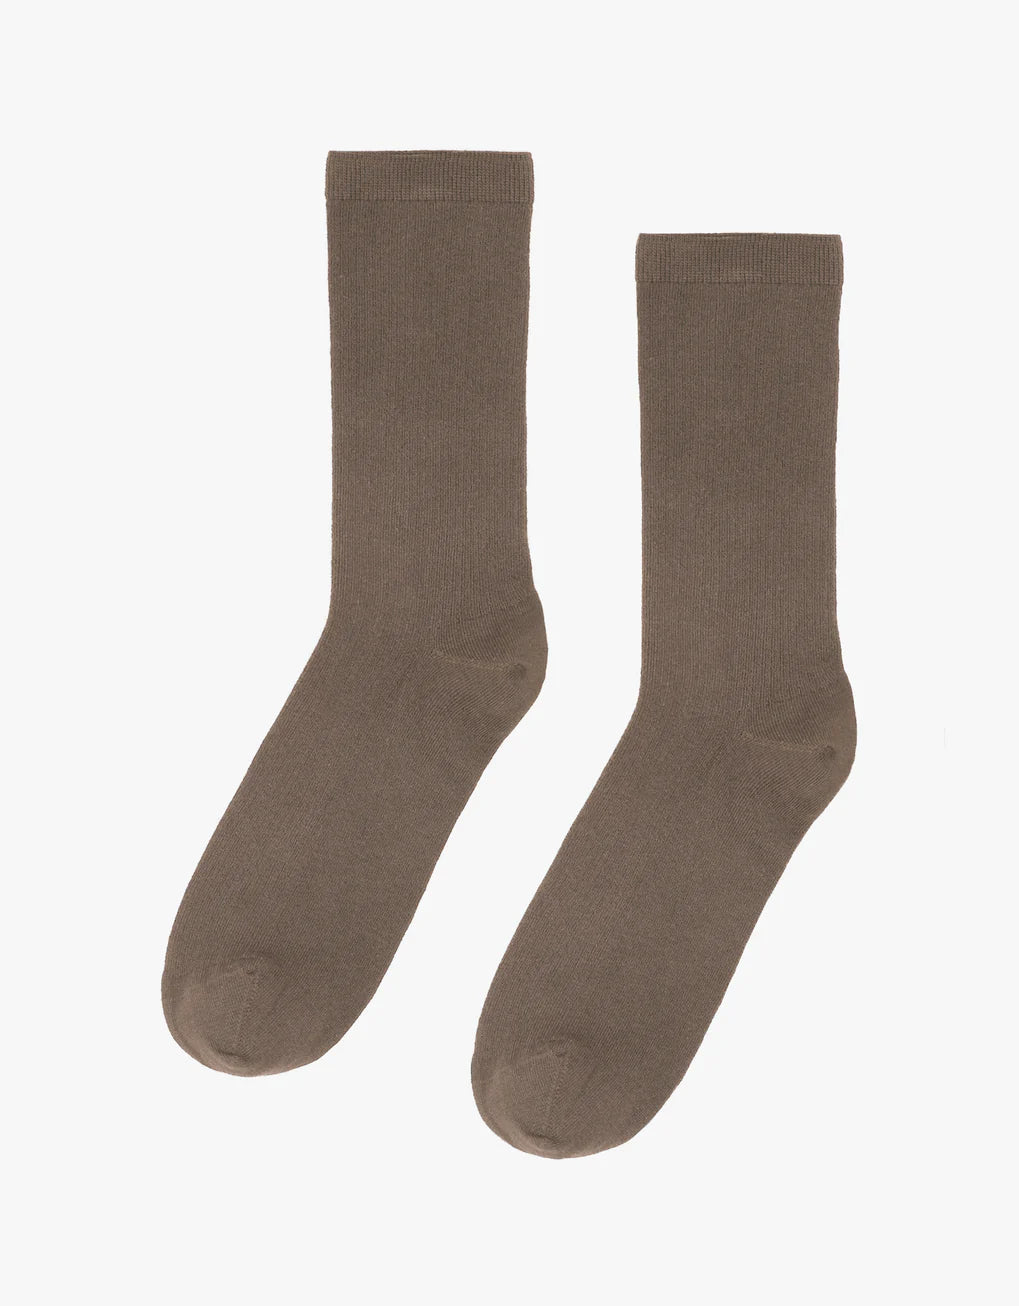 A pair of Classic Organic Socks by Colorful Standard on a white background, seamless and breathable.